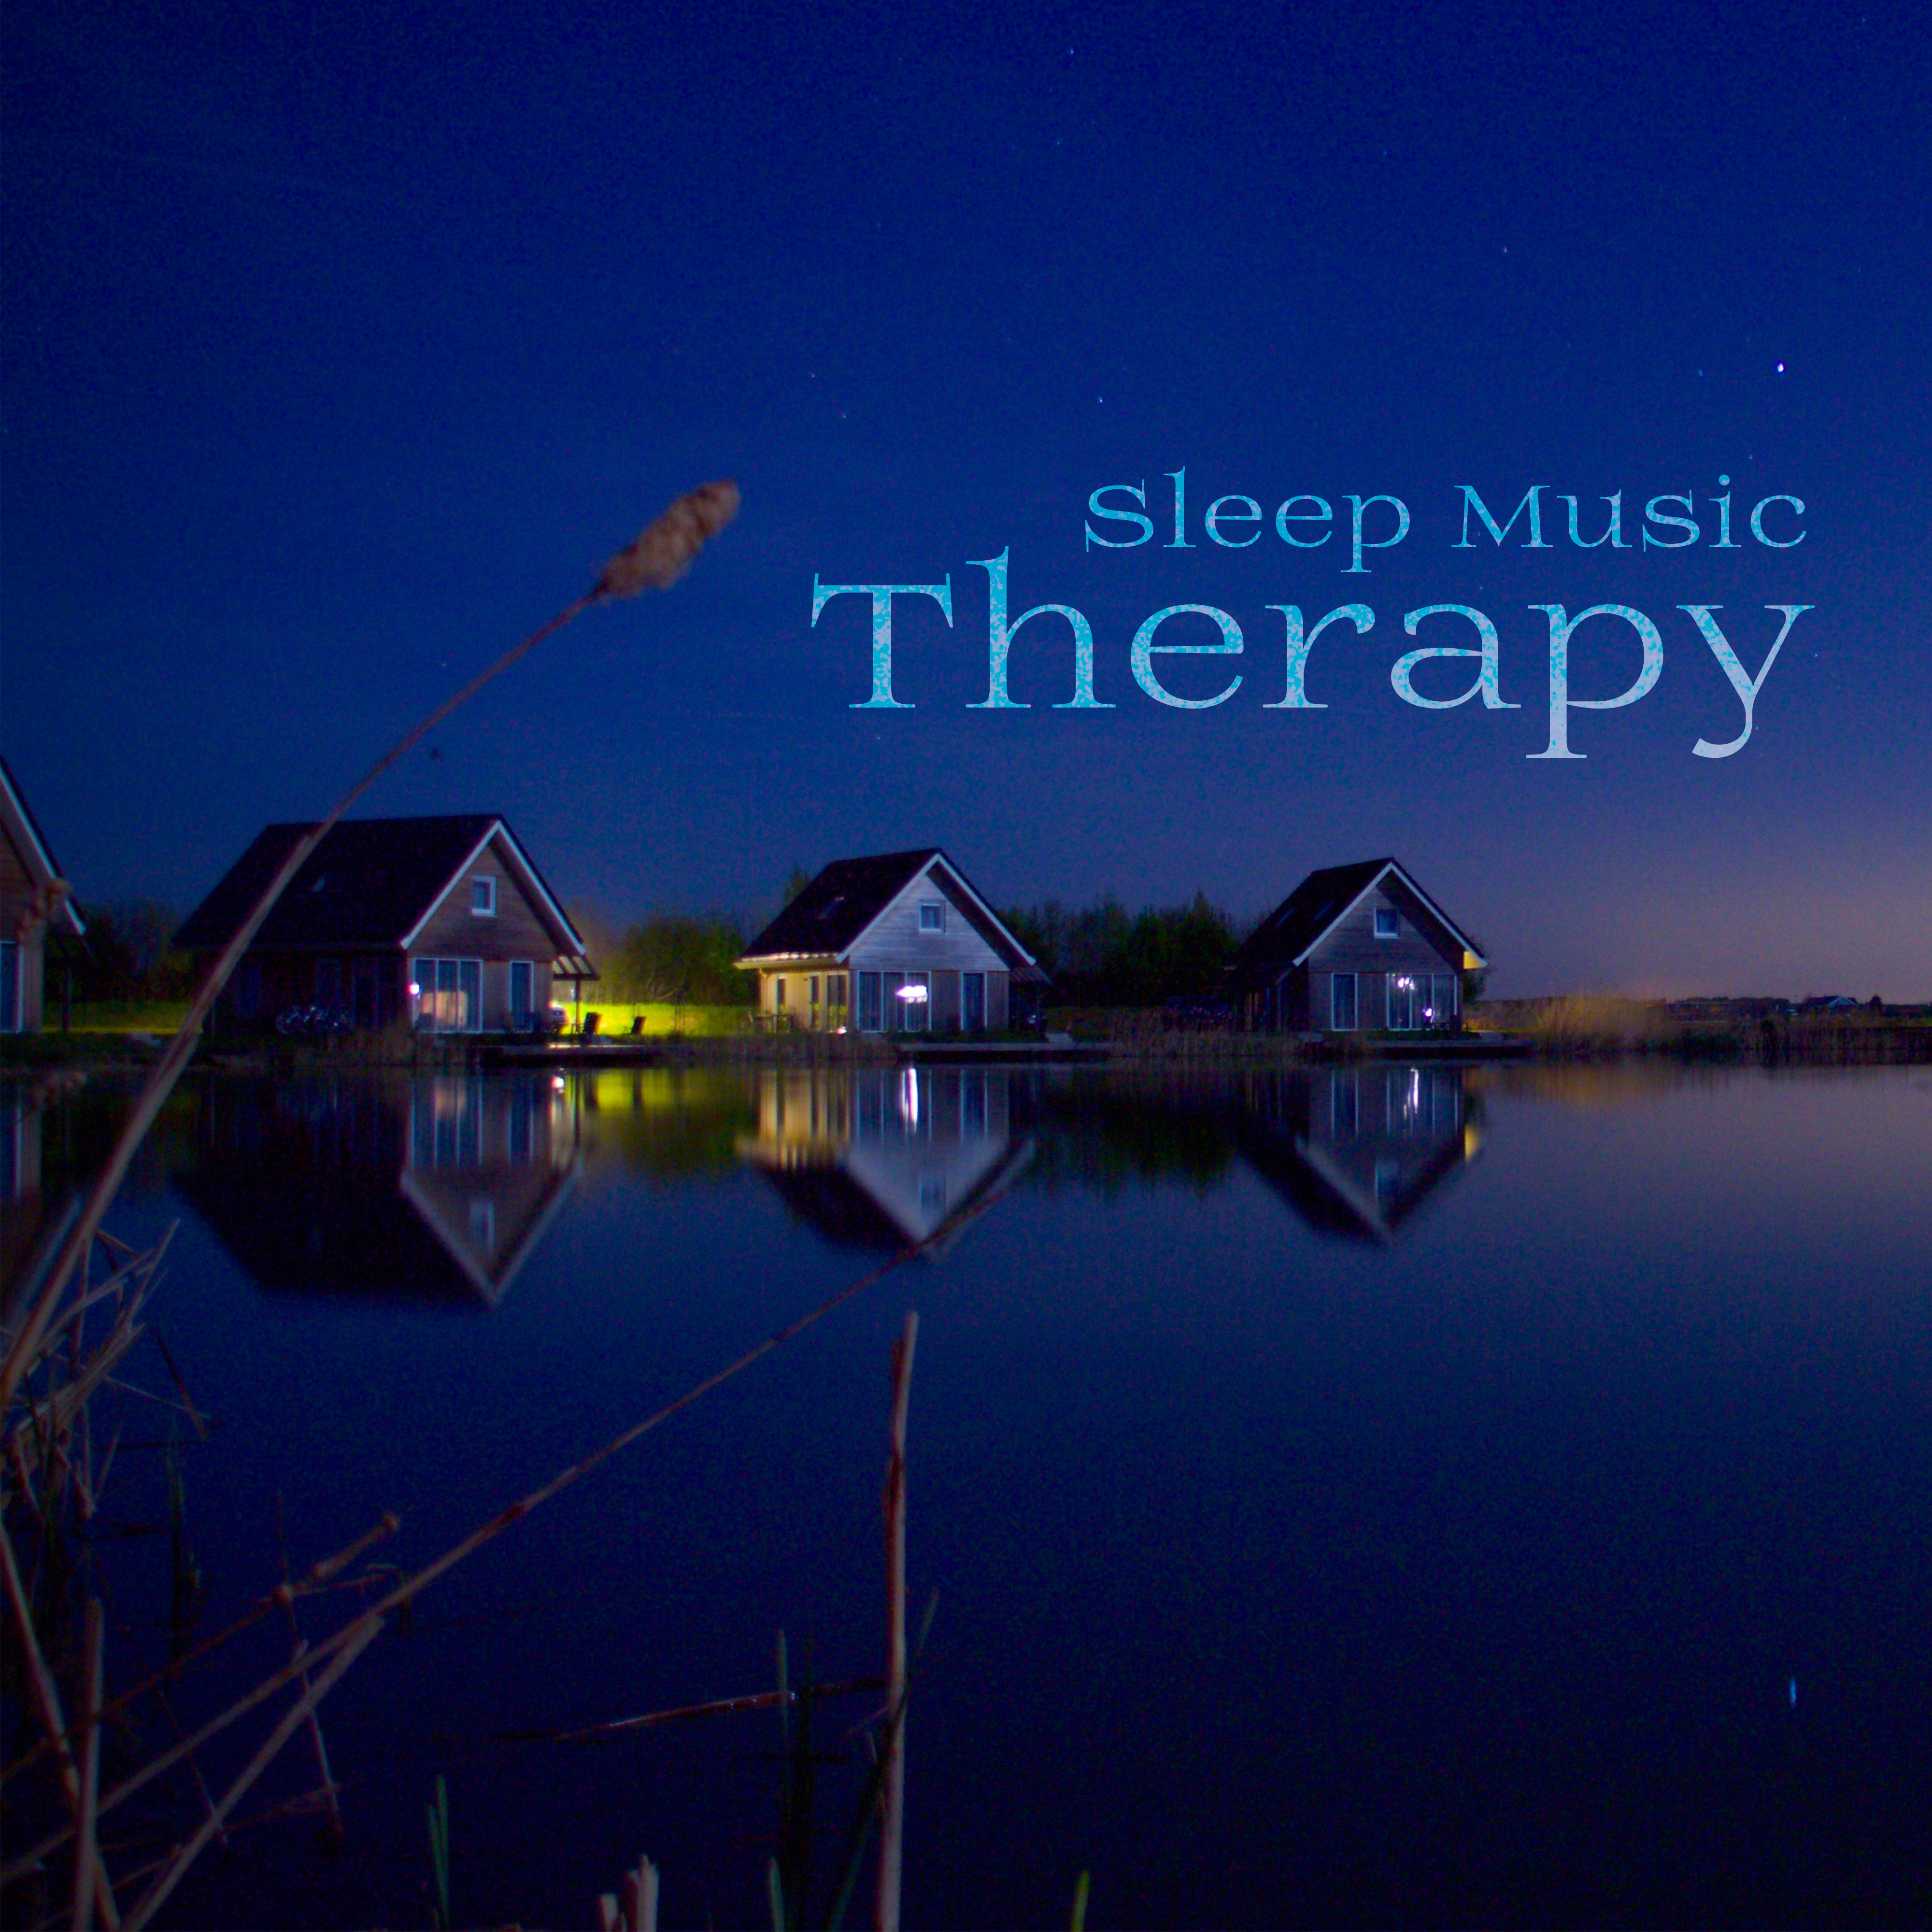 Sleep Music Therapy – Nature Sounds for Sleep, Cure Insomnia, Meditation & Relaxation, Naptime Helper